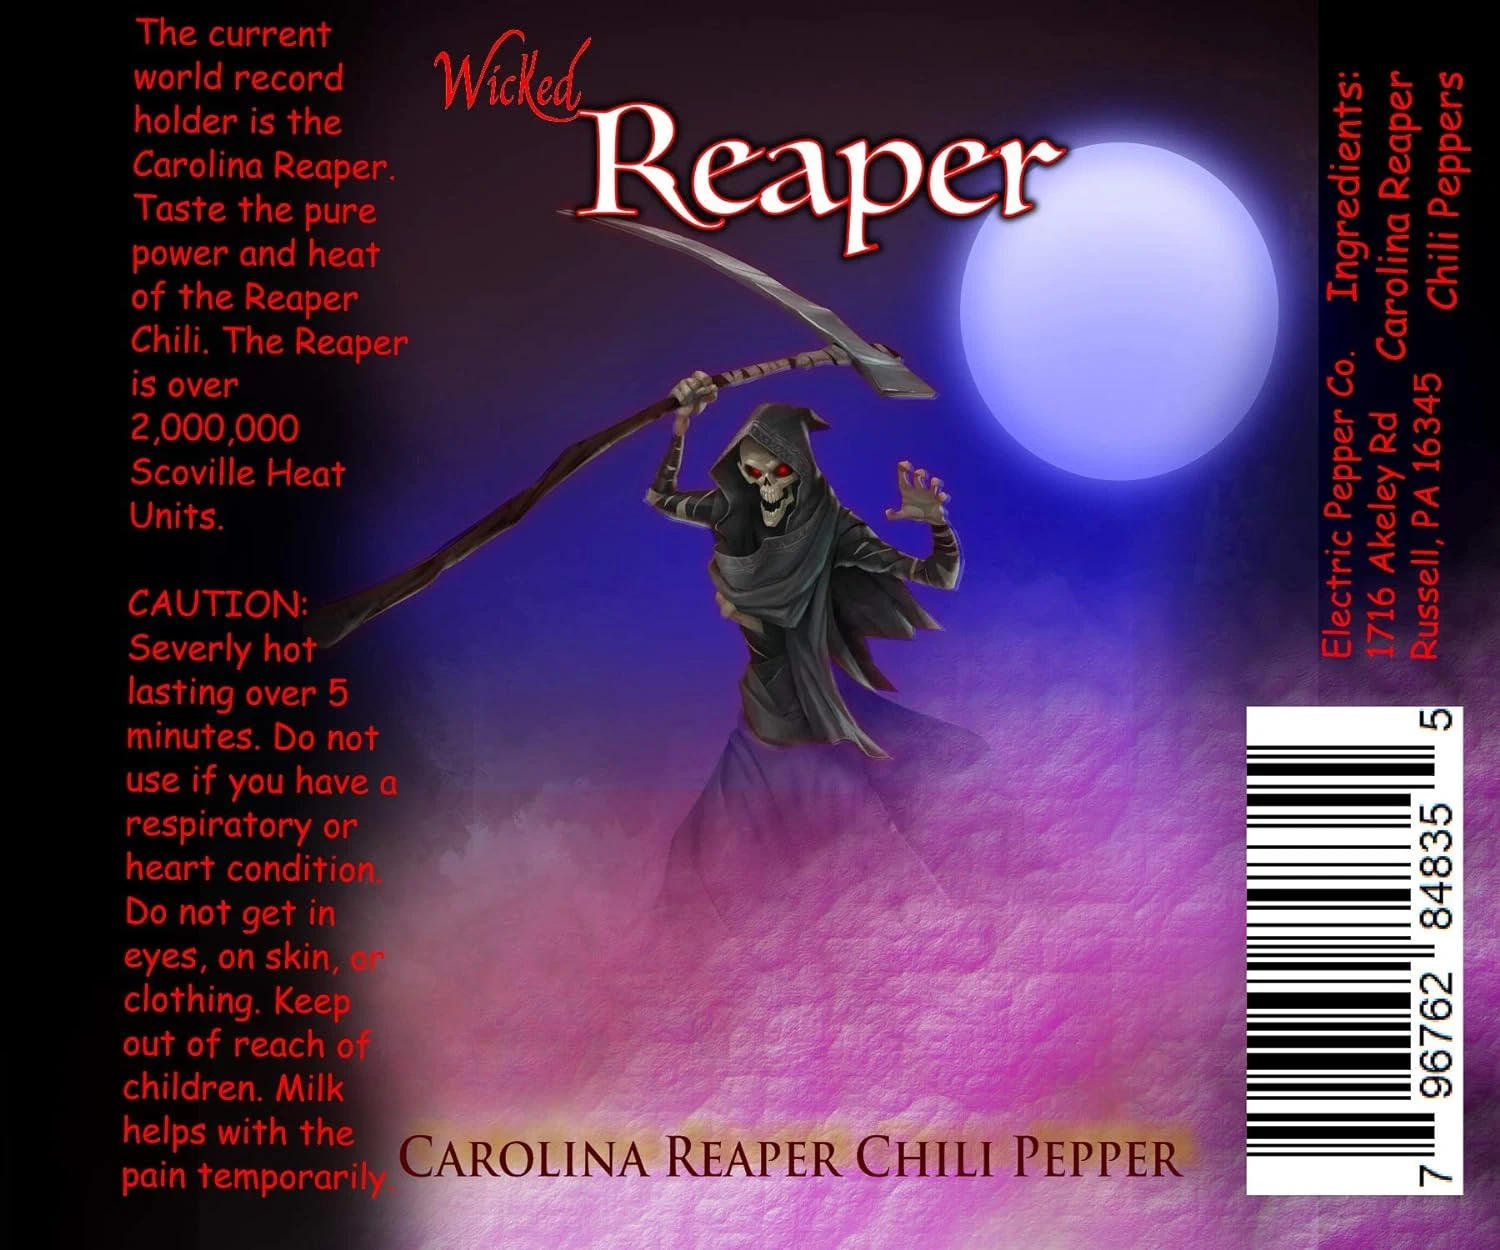 Product Label For Wicked Reaper Reaper Purple